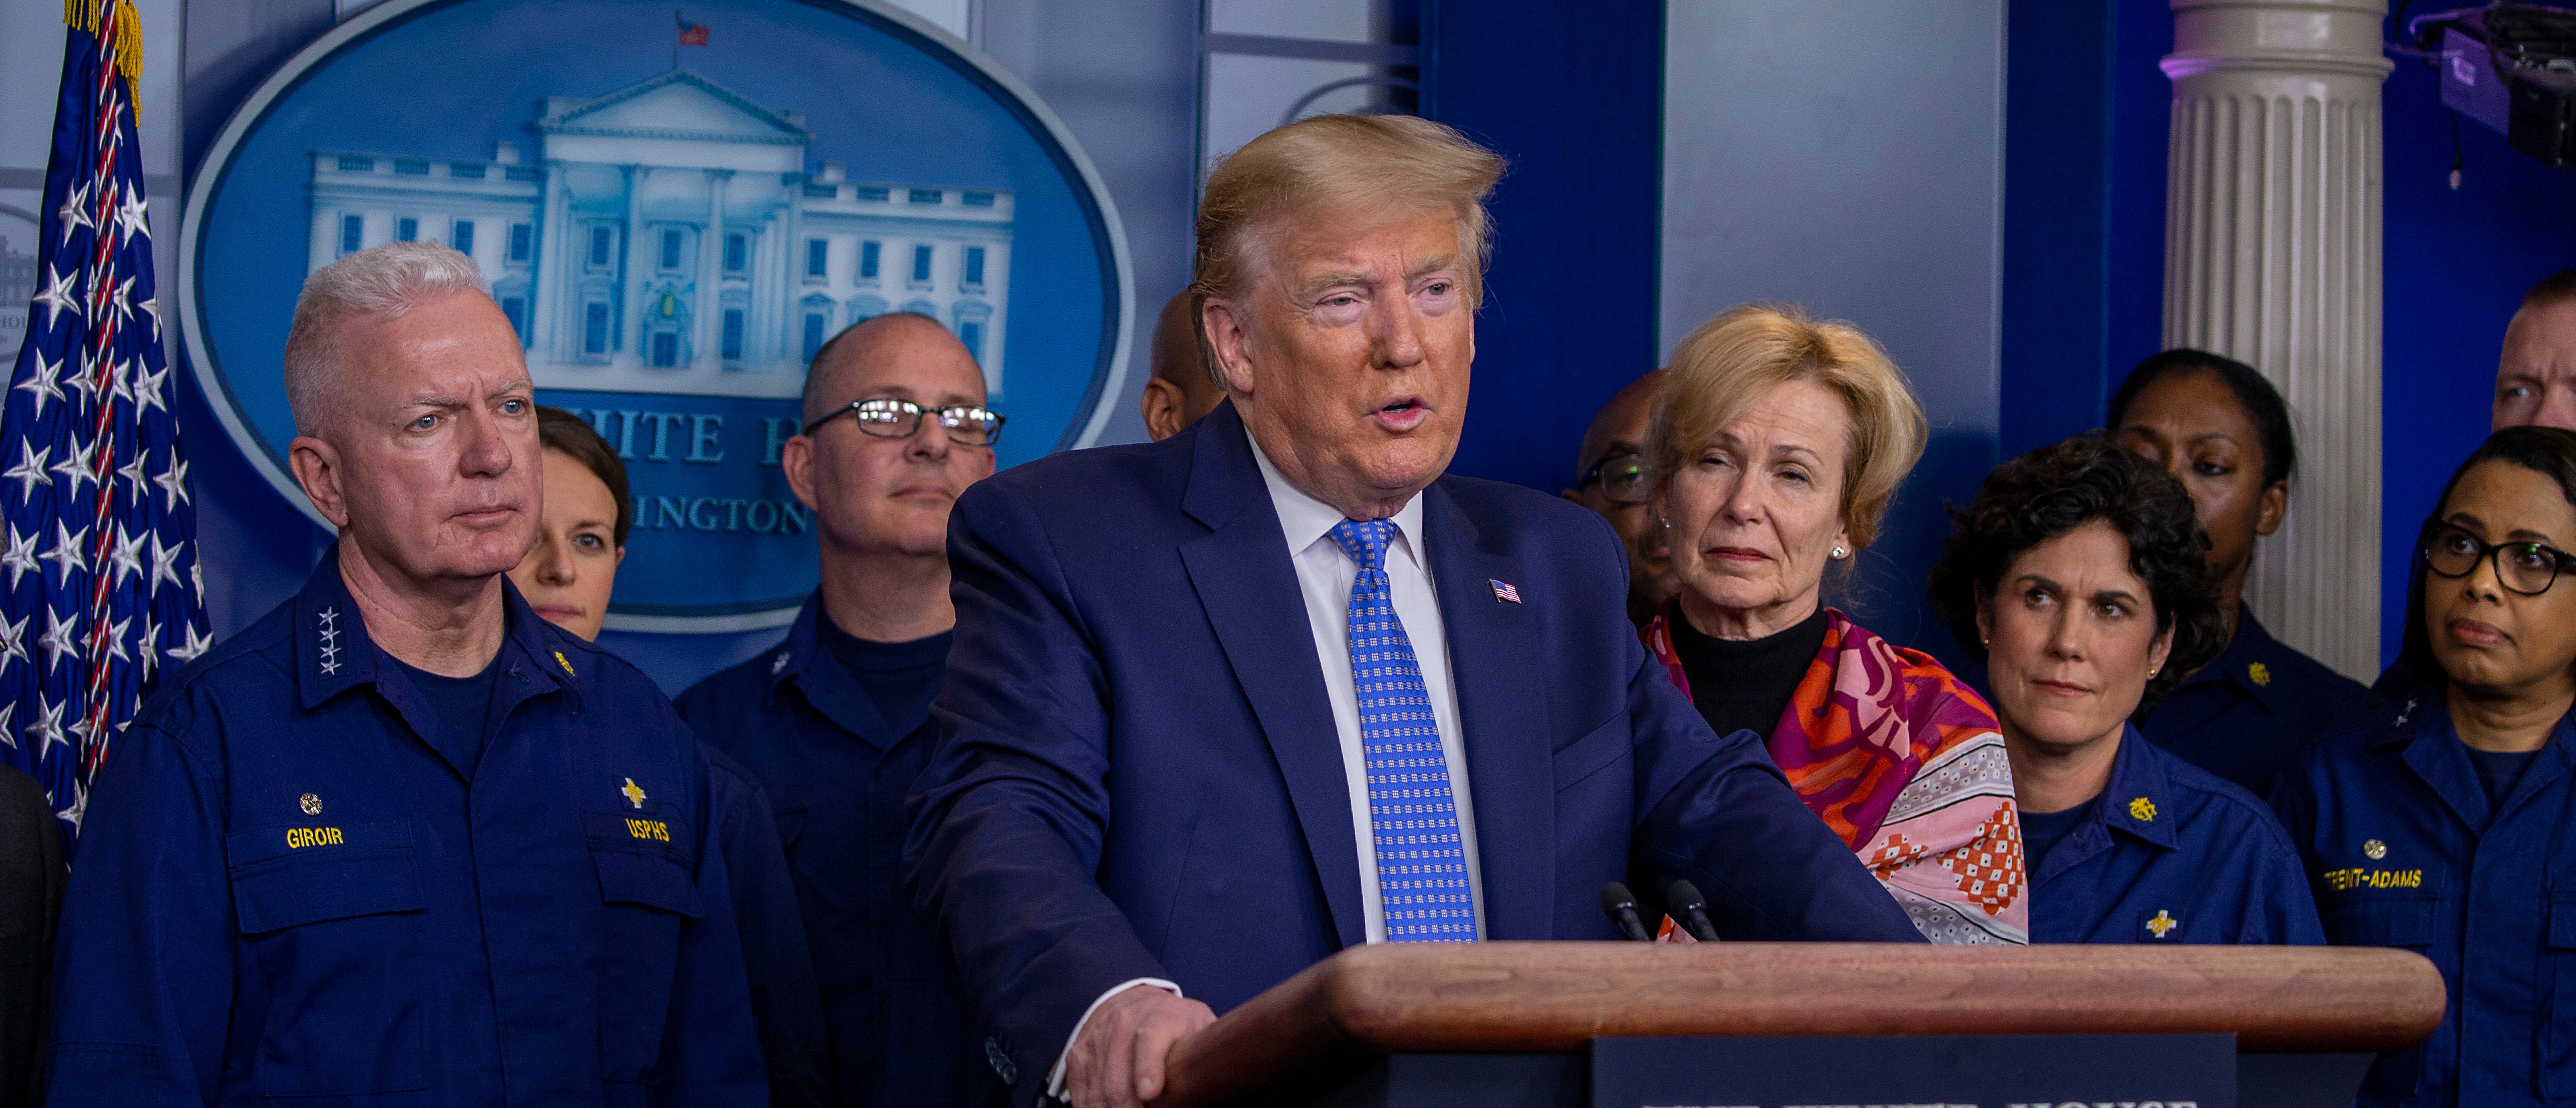 WASHINGTON, DC - MARCH 15: U.S. President Donald Trump speaks to the media in the press briefing room at the White House on March 15, 2020 in Washington, DC. The United States has surpassed 3,000 confirmed cases of the coronavirus, and the death toll climbed to at least 61, with 25 of the deaths associated with the Life Care Center in Kirkland, Washington. (Photo by Tasos Katopodis/Getty Images)